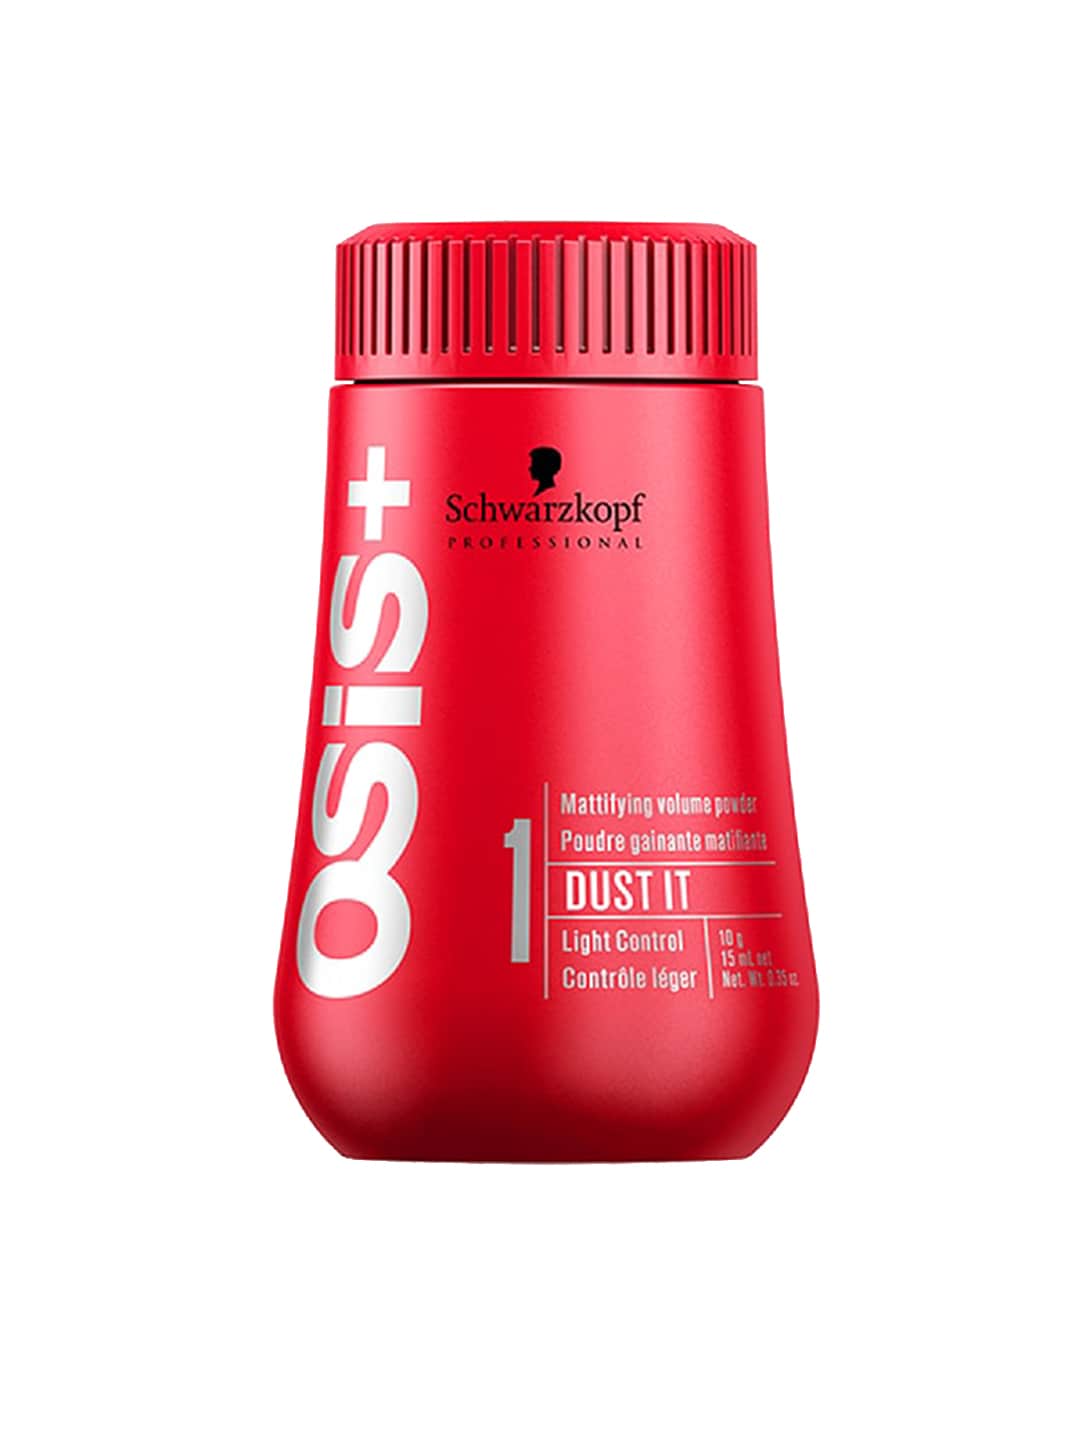 Schwarzkopf PROFESSIONAL Osis+ Dust It 10g Price in India